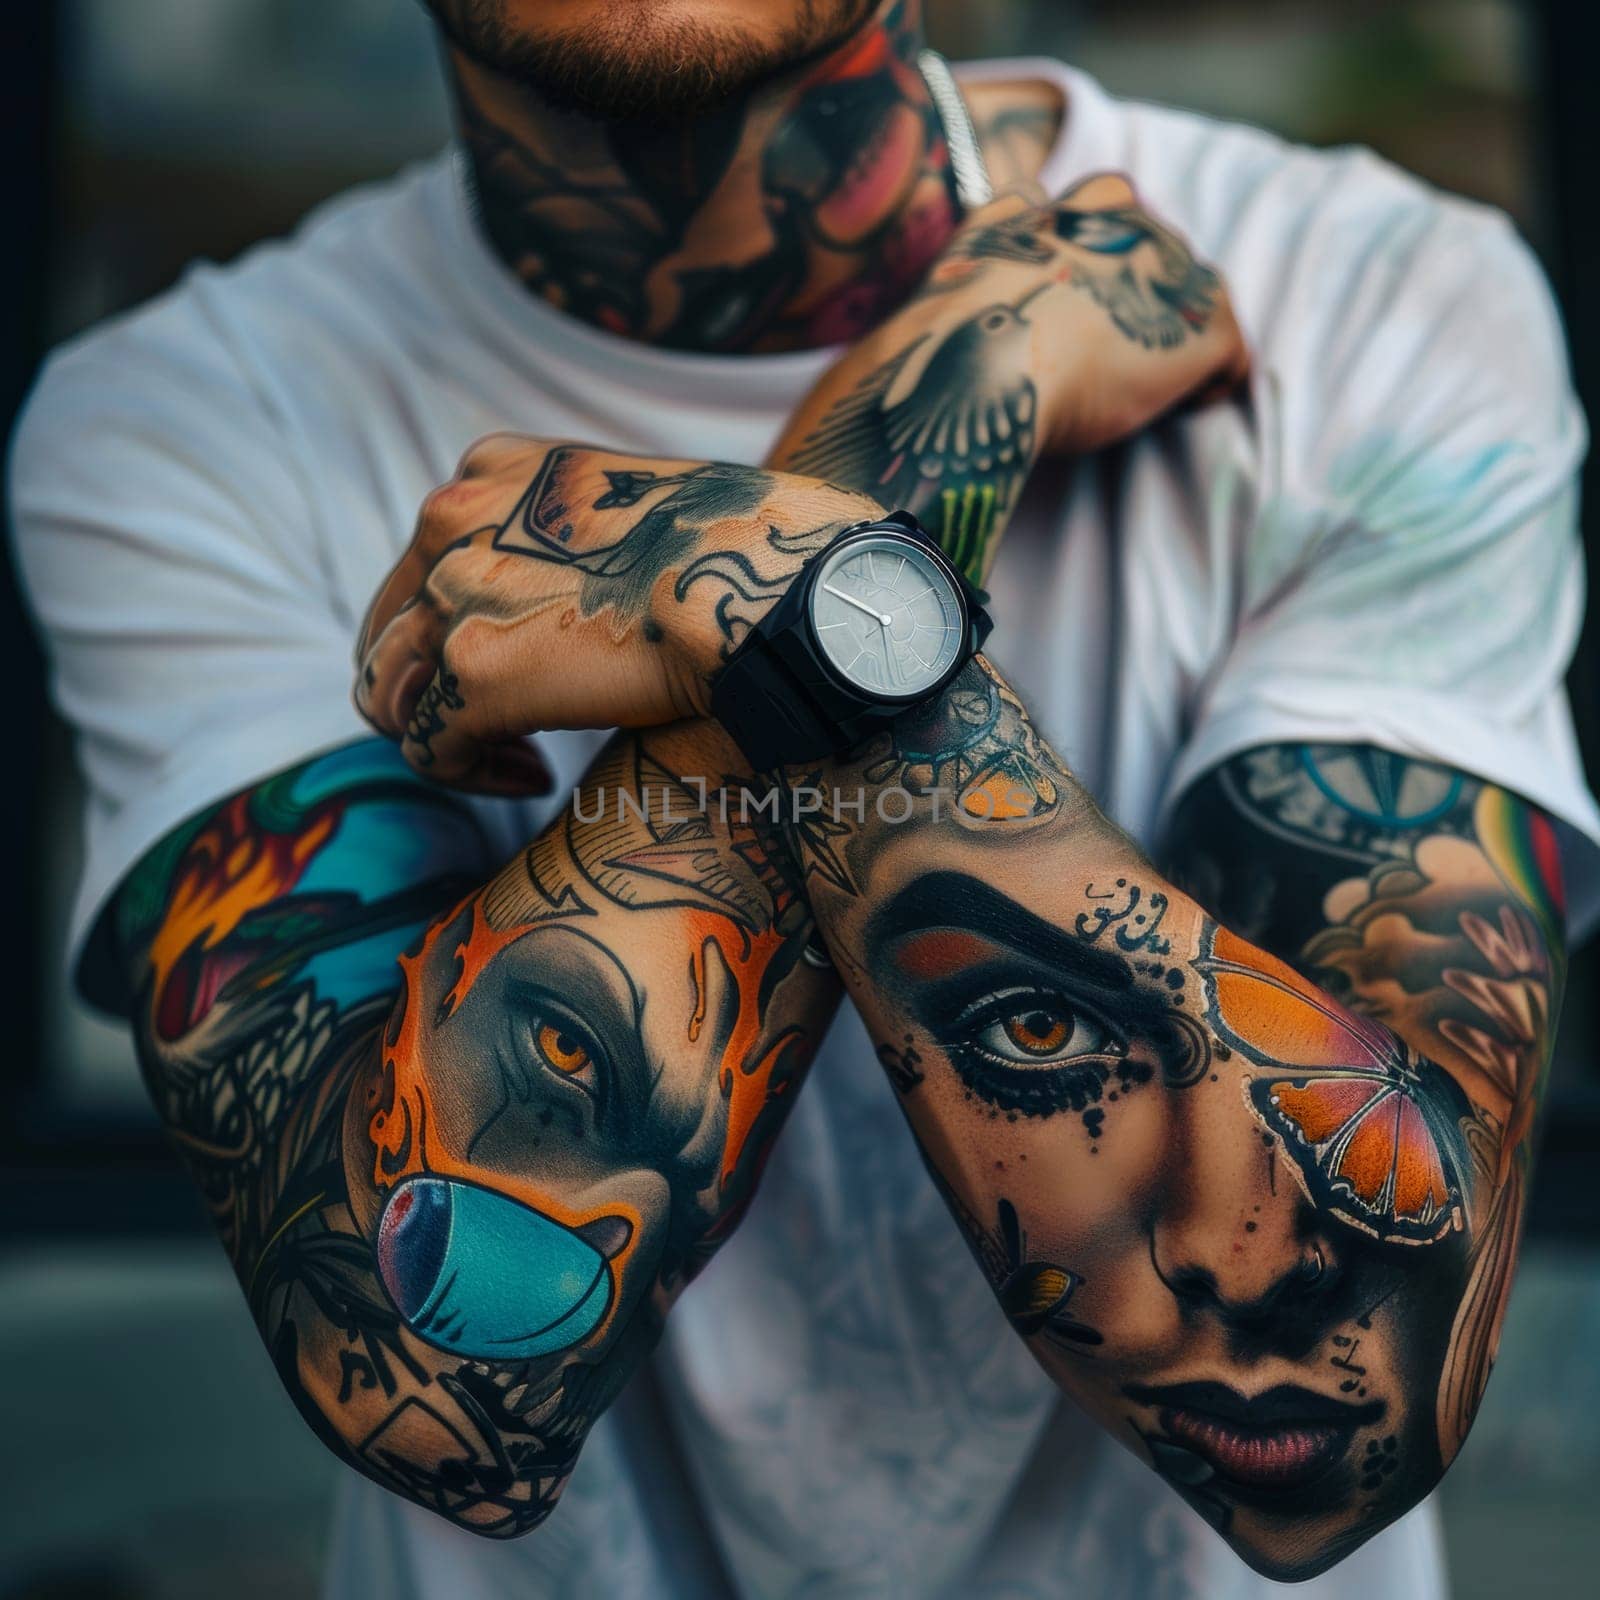 Man with creative tattoos on his arms.